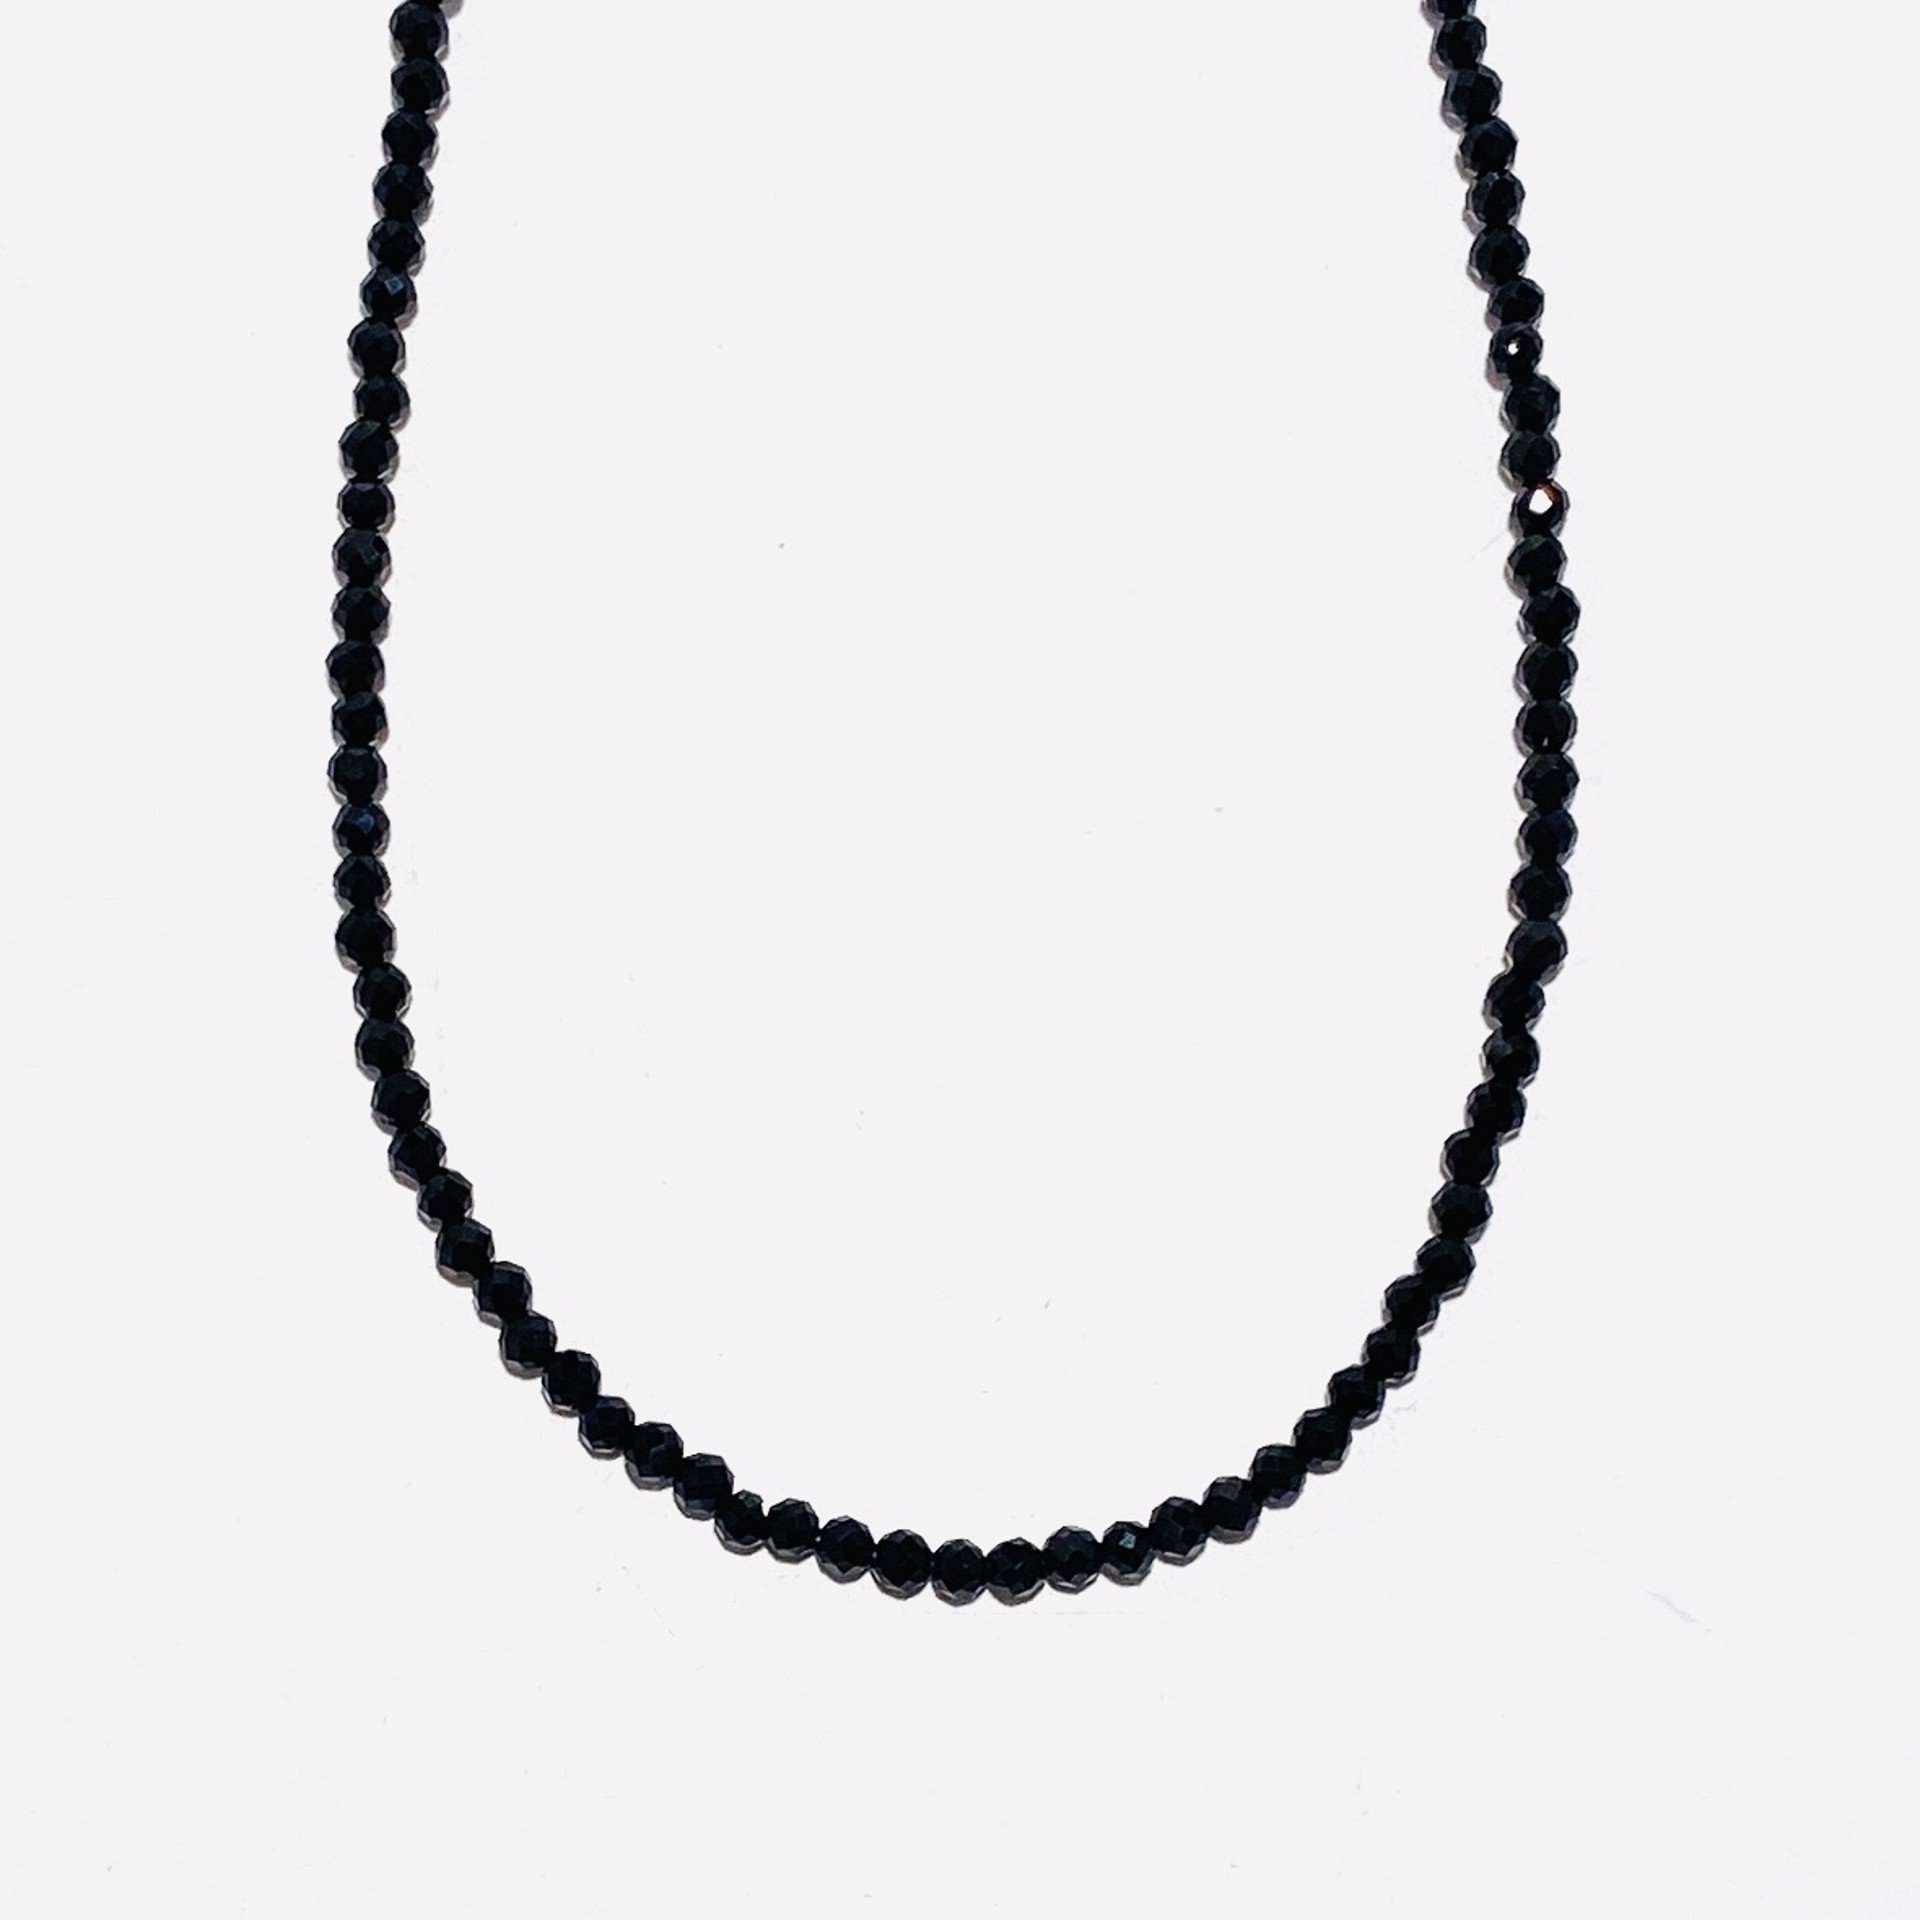 Faceted Black Spinel Strand Necklace by Nance Trueworthy